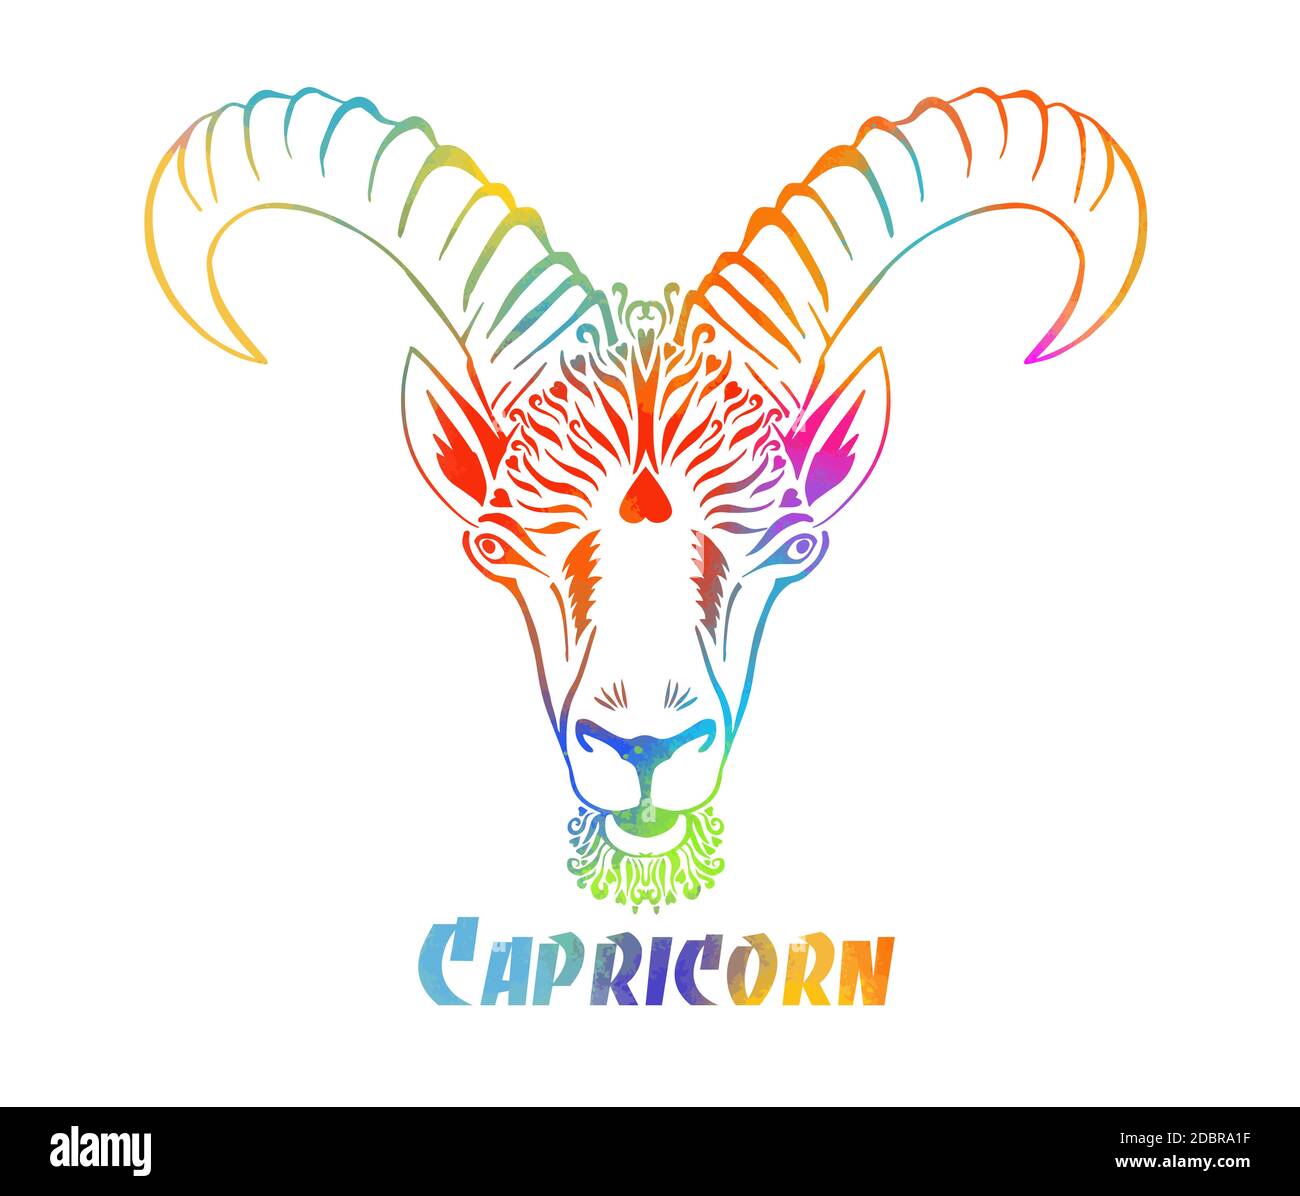 Capricorn is the sign of the zodiac. The goat's head. T-shirt print. Mixed media. Vector illustration Stock Vector